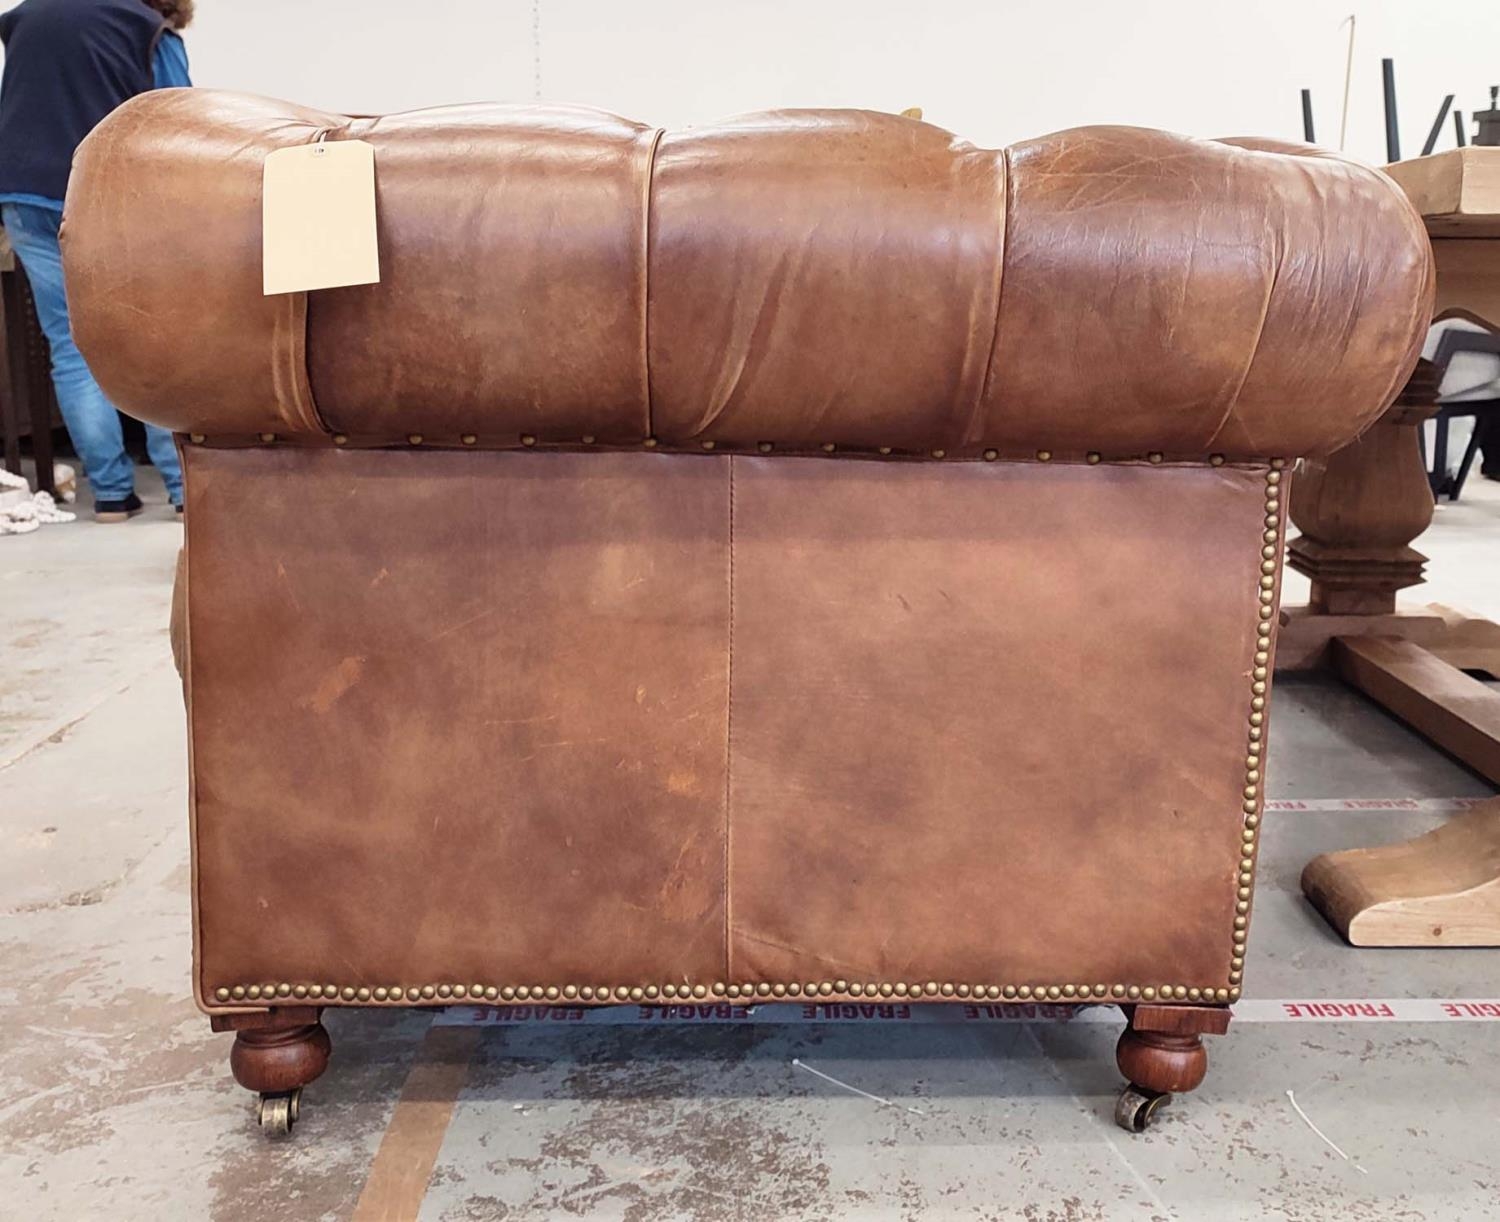 CHESTERFIELD SOFA, in buttoned brown leather, 95cm D x 80cm H x 255cm W, with two cushions. - Image 7 of 8